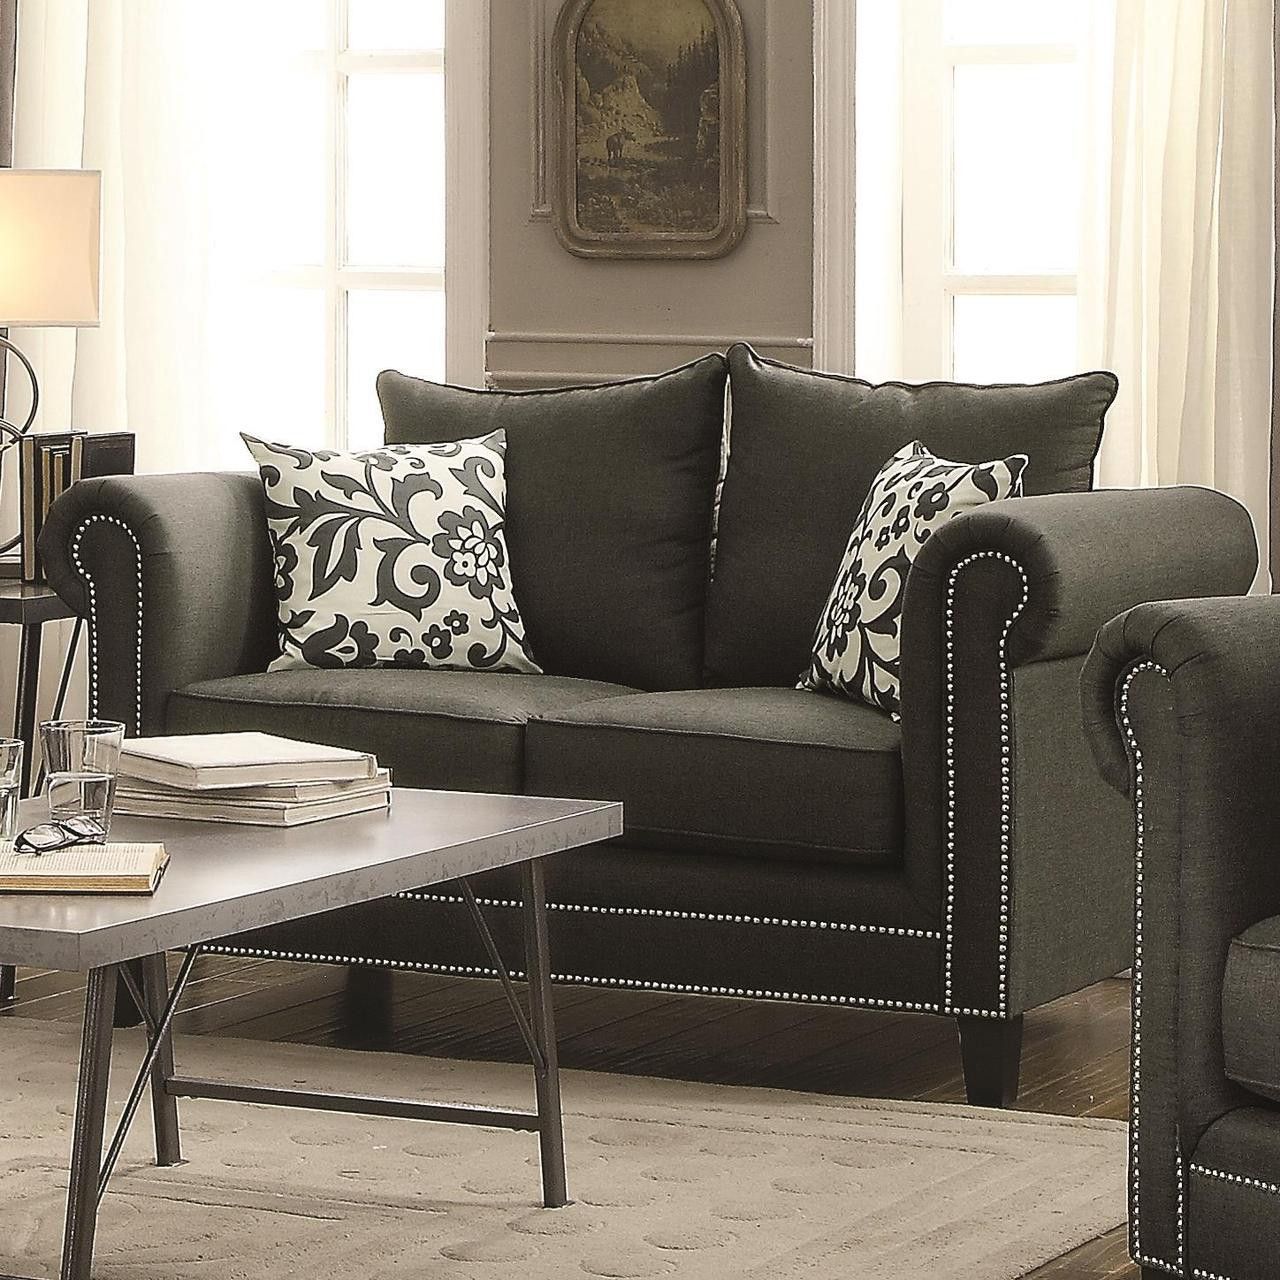 Beatrice Charcoal Linen Sofa And Loveseat – Cb Furniture In Light Charcoal Linen Sofas (View 4 of 20)